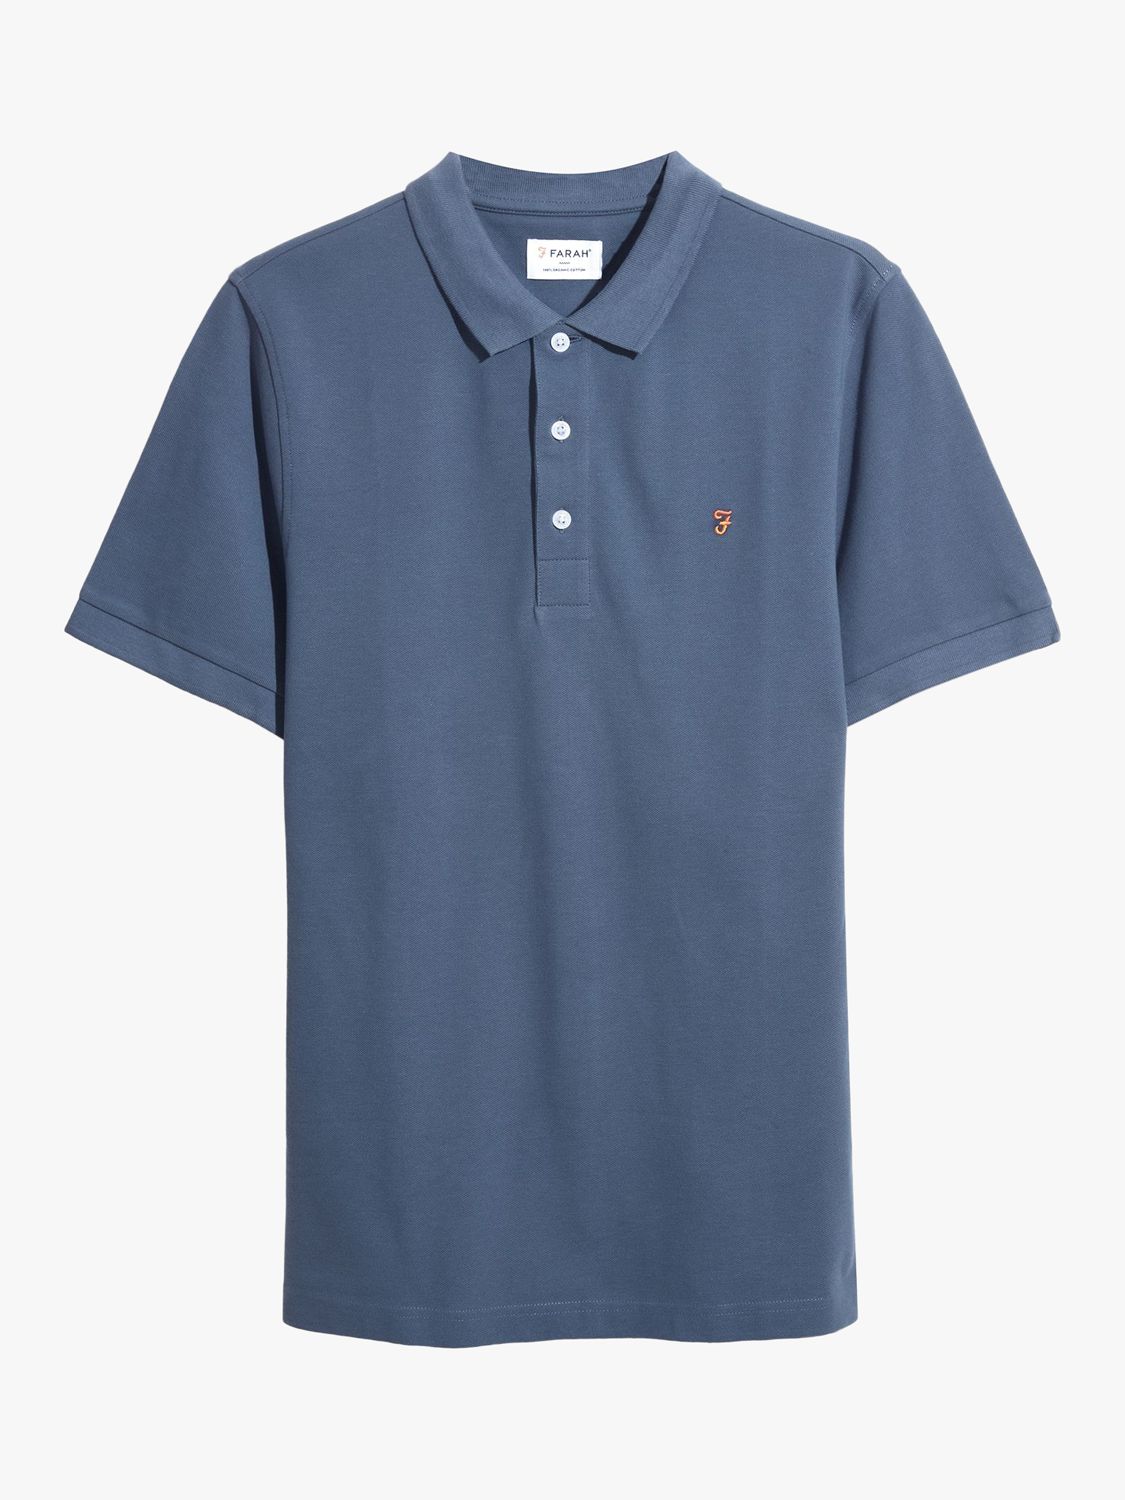 Farah Blanes Short Sleeve Polo Top, River Bed, L